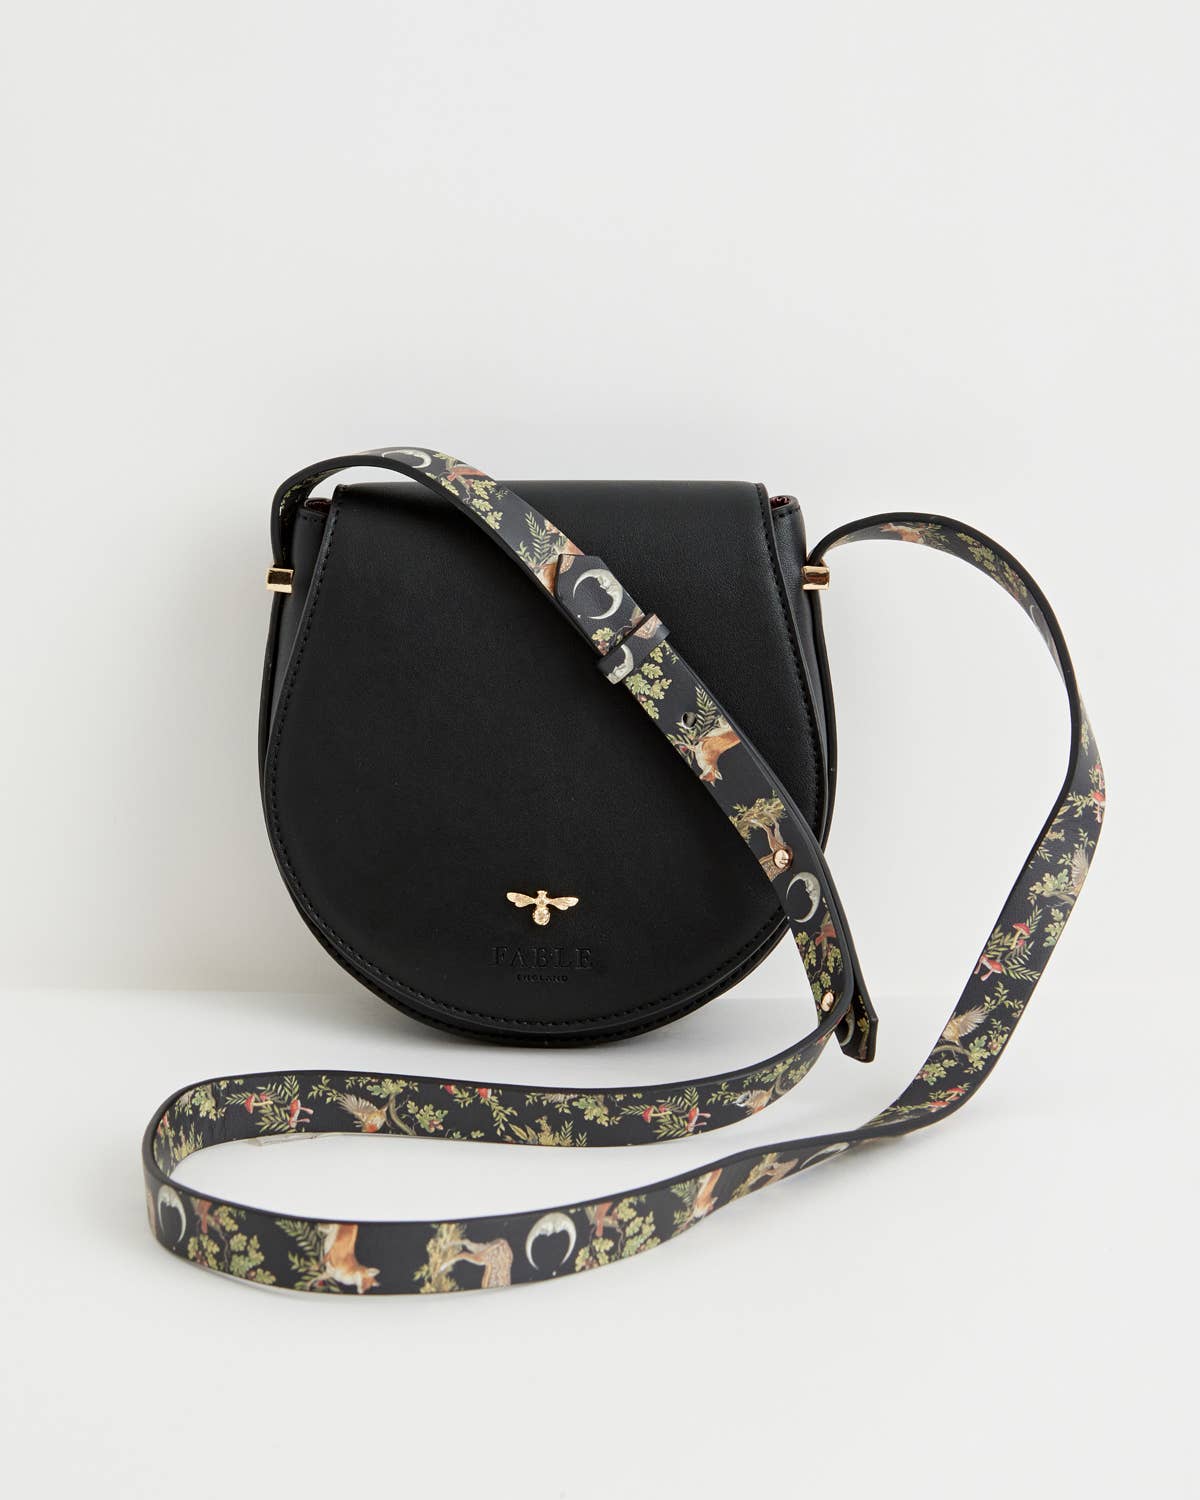 A Night's Tale Saddle Bag Black - Out of the Blue